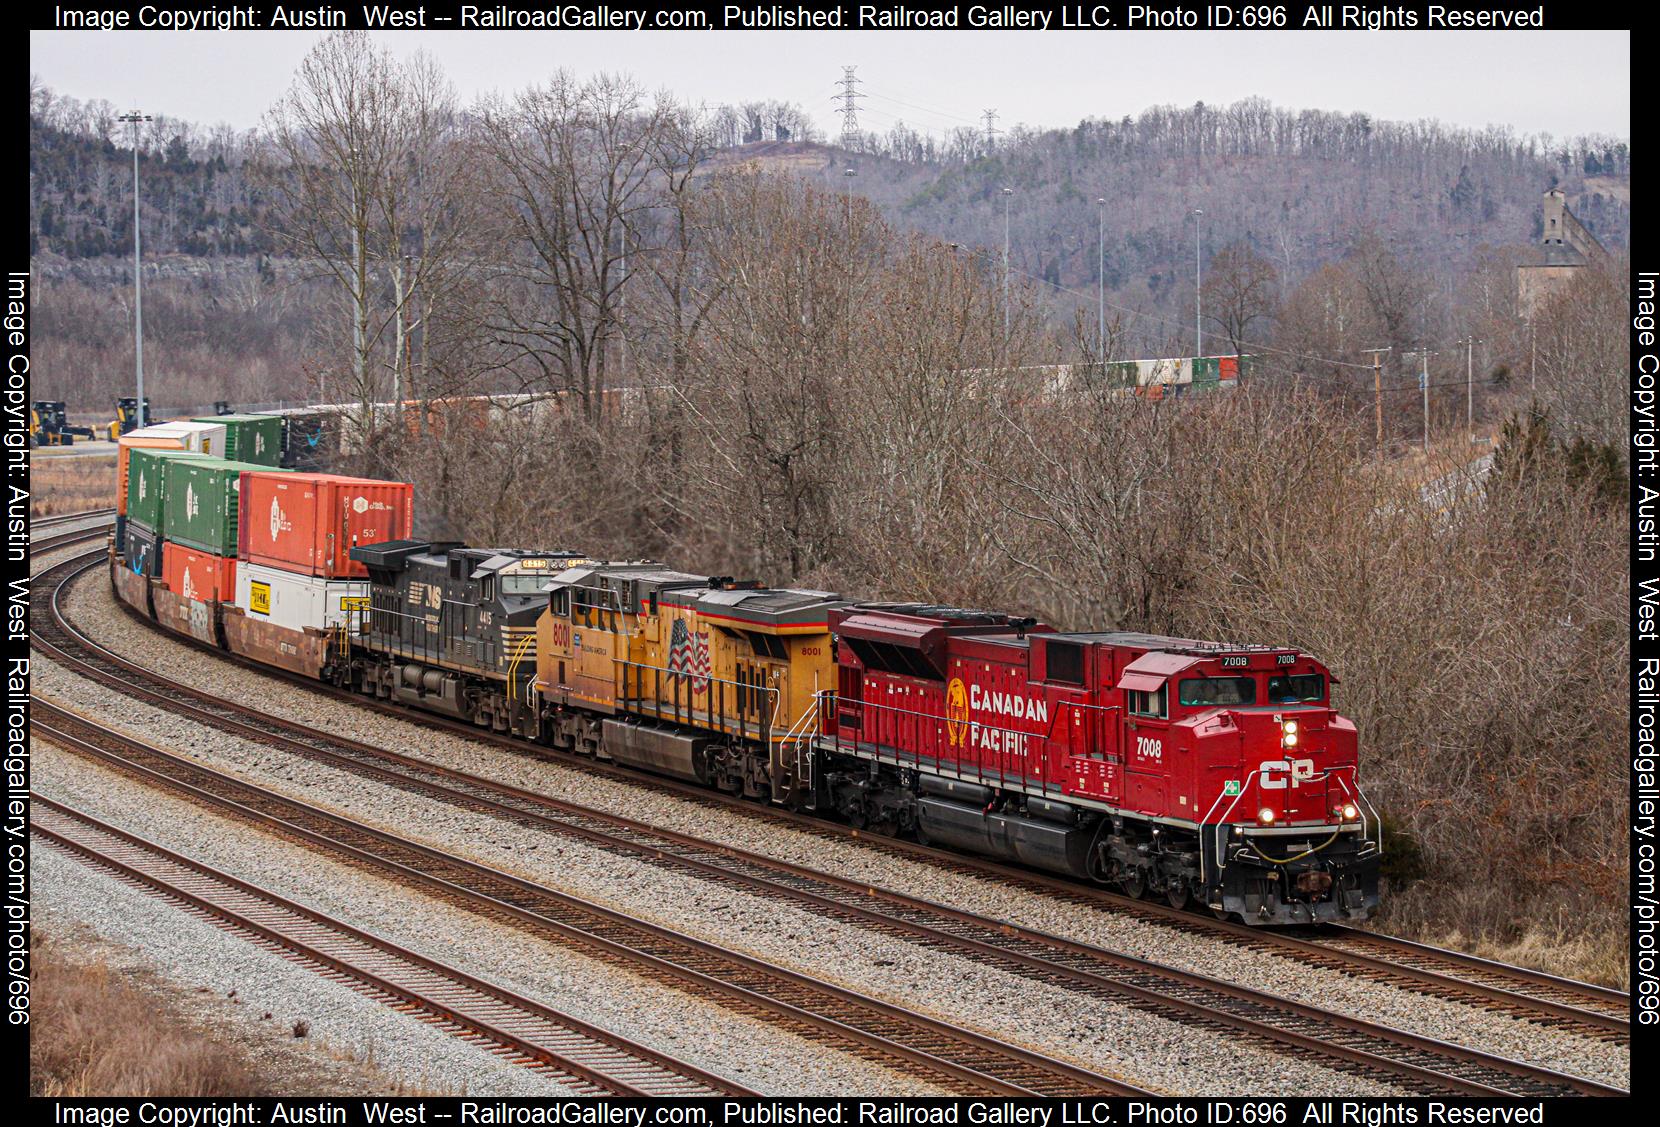 CP 7008 is a class EMD SD70ACU and  is pictured in Prichard, West Virginia, USA.  This was taken along the Kenova District  on the Canadian Pacific . Photo Copyright: Austin  West uploaded to Railroad Gallery on 02/15/2023. This photograph of CP 7008 was taken on Sunday, January 08, 2023. All Rights Reserved. 